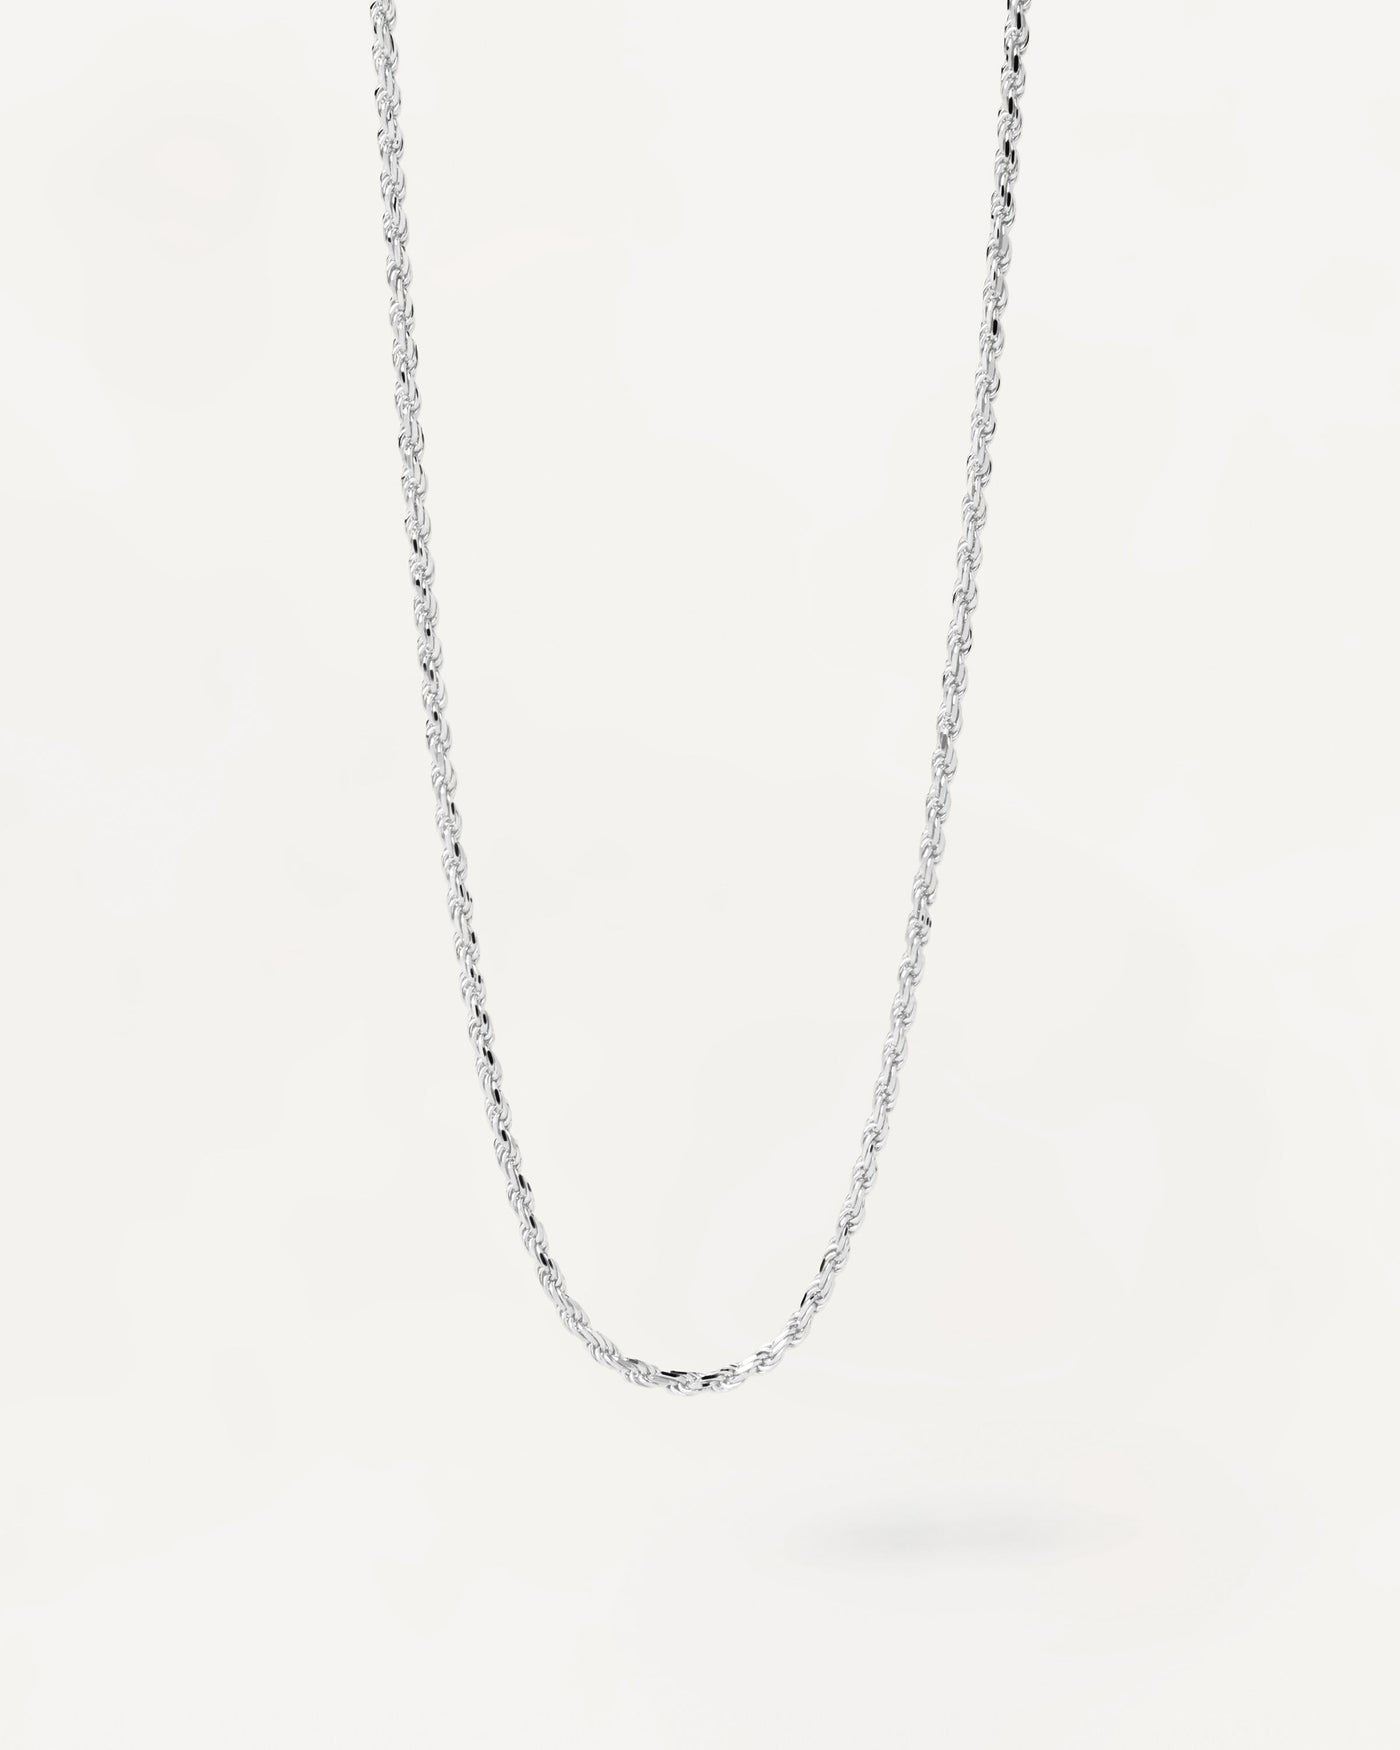 2023 Selection | White Gold Rope Chain Necklace. 18K solid white gold chain necklace with rope links. Get the latest arrival from PDPAOLA. Place your order safely and get this Best Seller. Free Shipping.